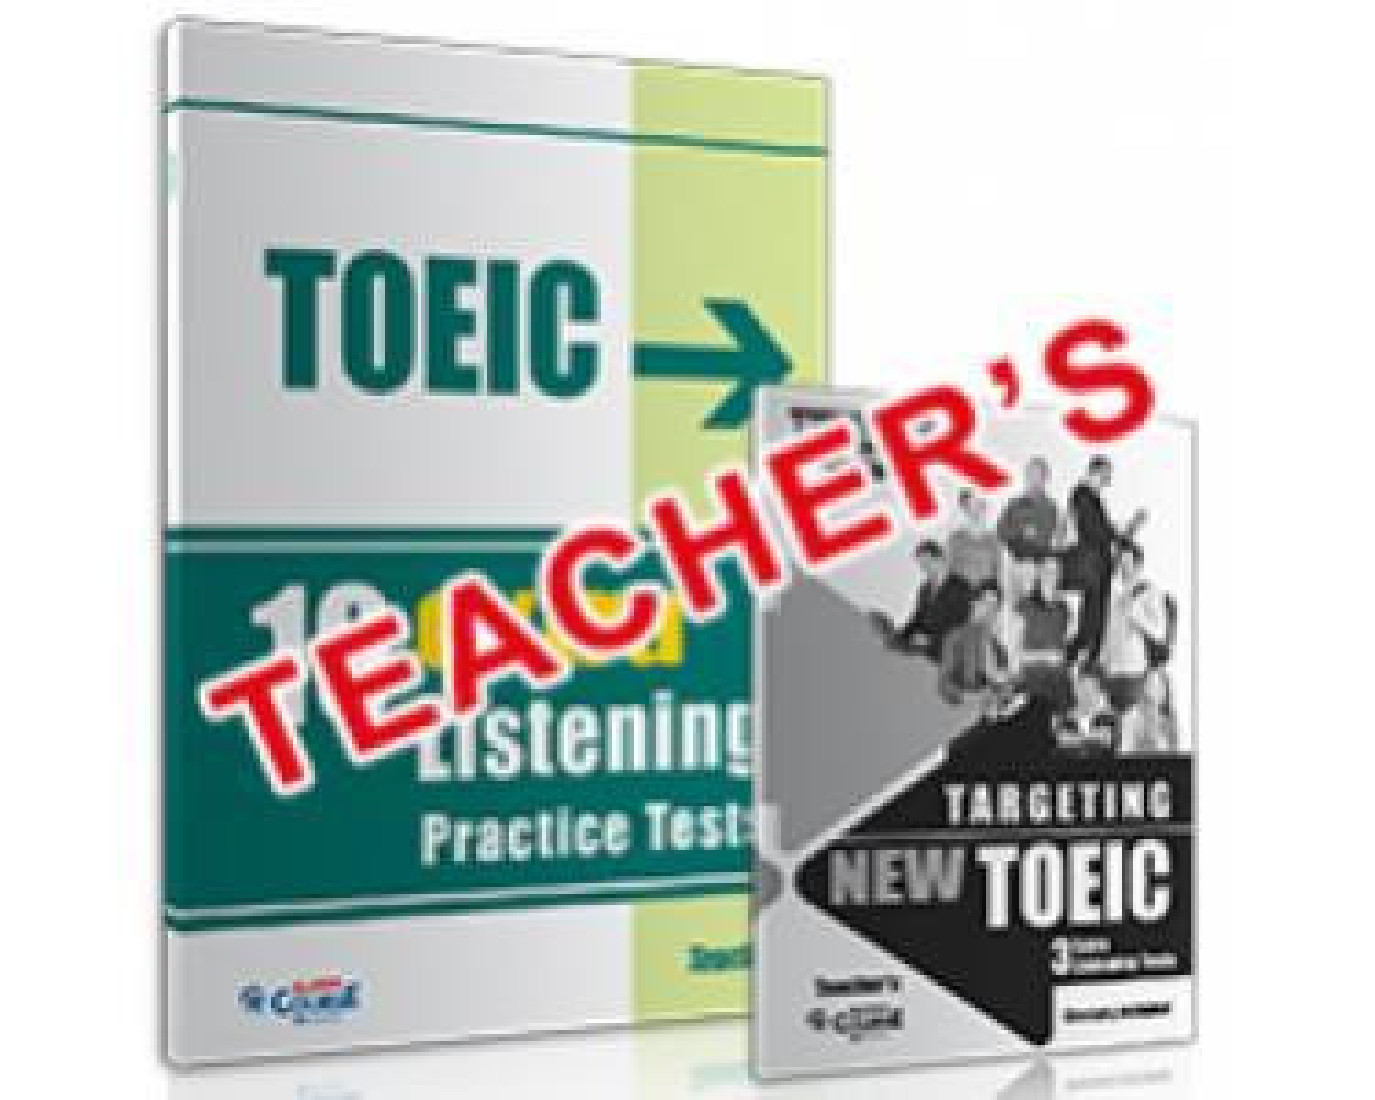 TOEIC 10 EXTRA LISTENING & 3 EXTRA LISTENING PRACTICE TESTS TCHRS